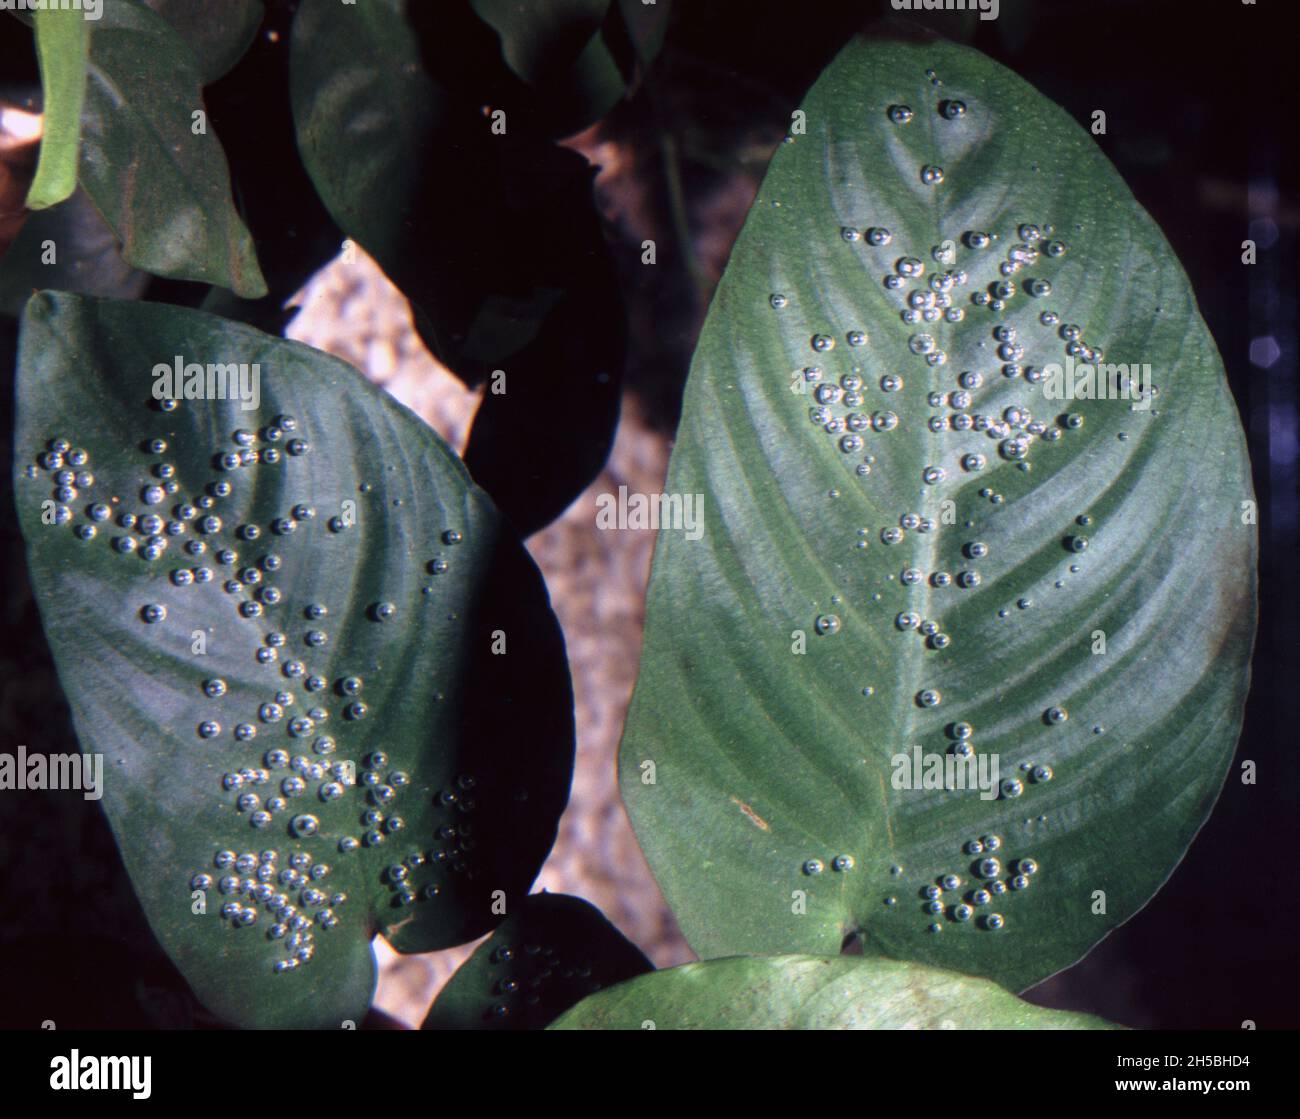 Oxygen bubbles production on the Anubias barteri leaves Stock Photo